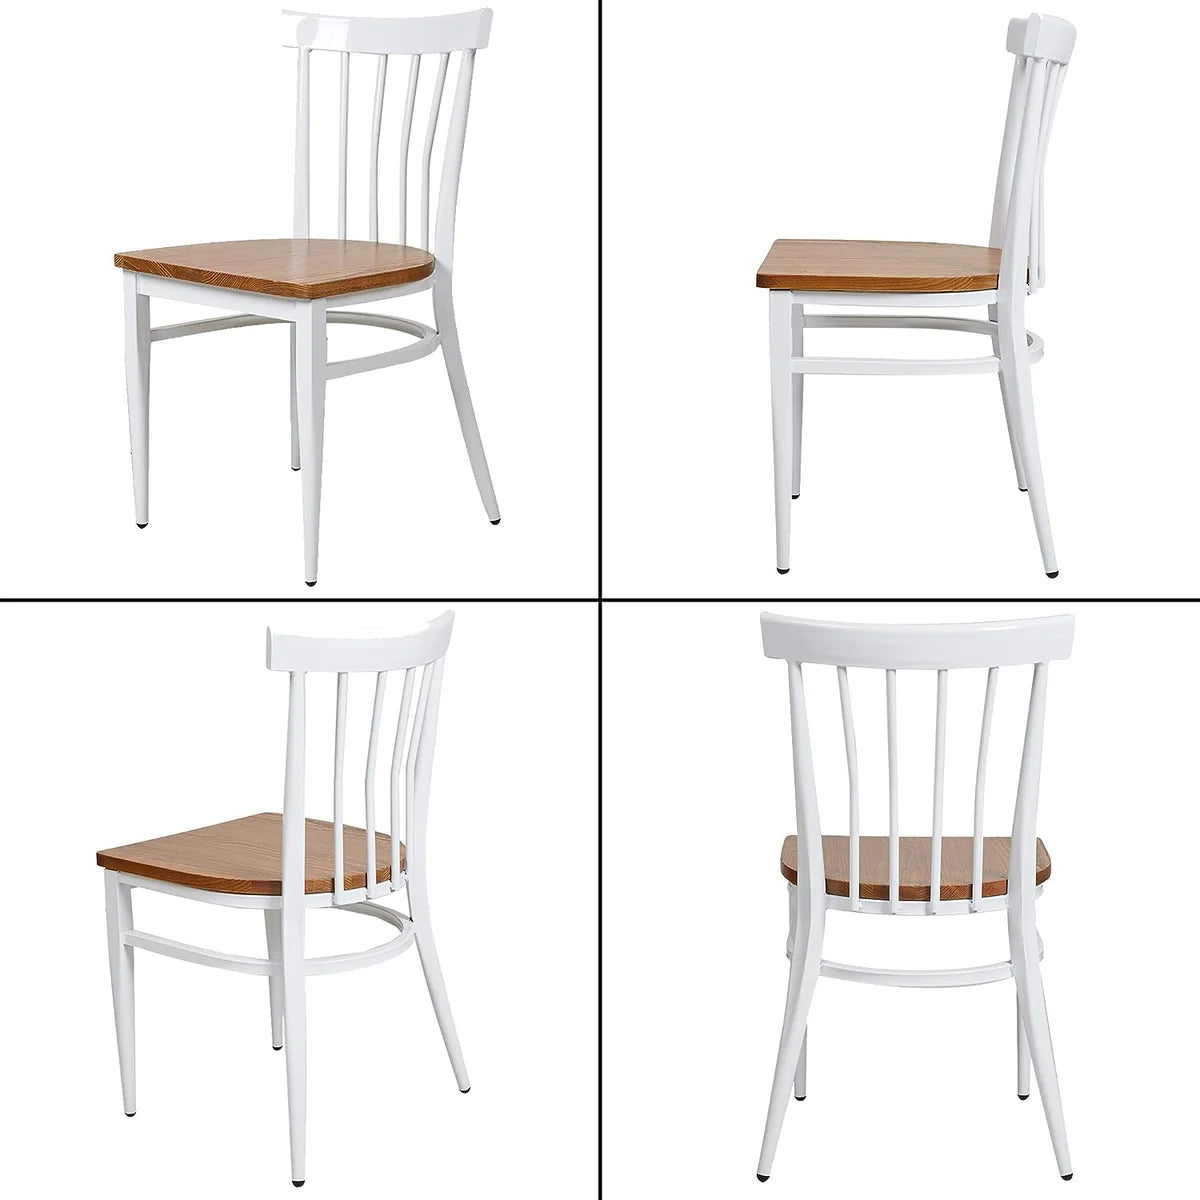 2 Set of   Natural Wood Seat Iron Frame Kitchen Chairs Dining Side Chairs, Comb Back White